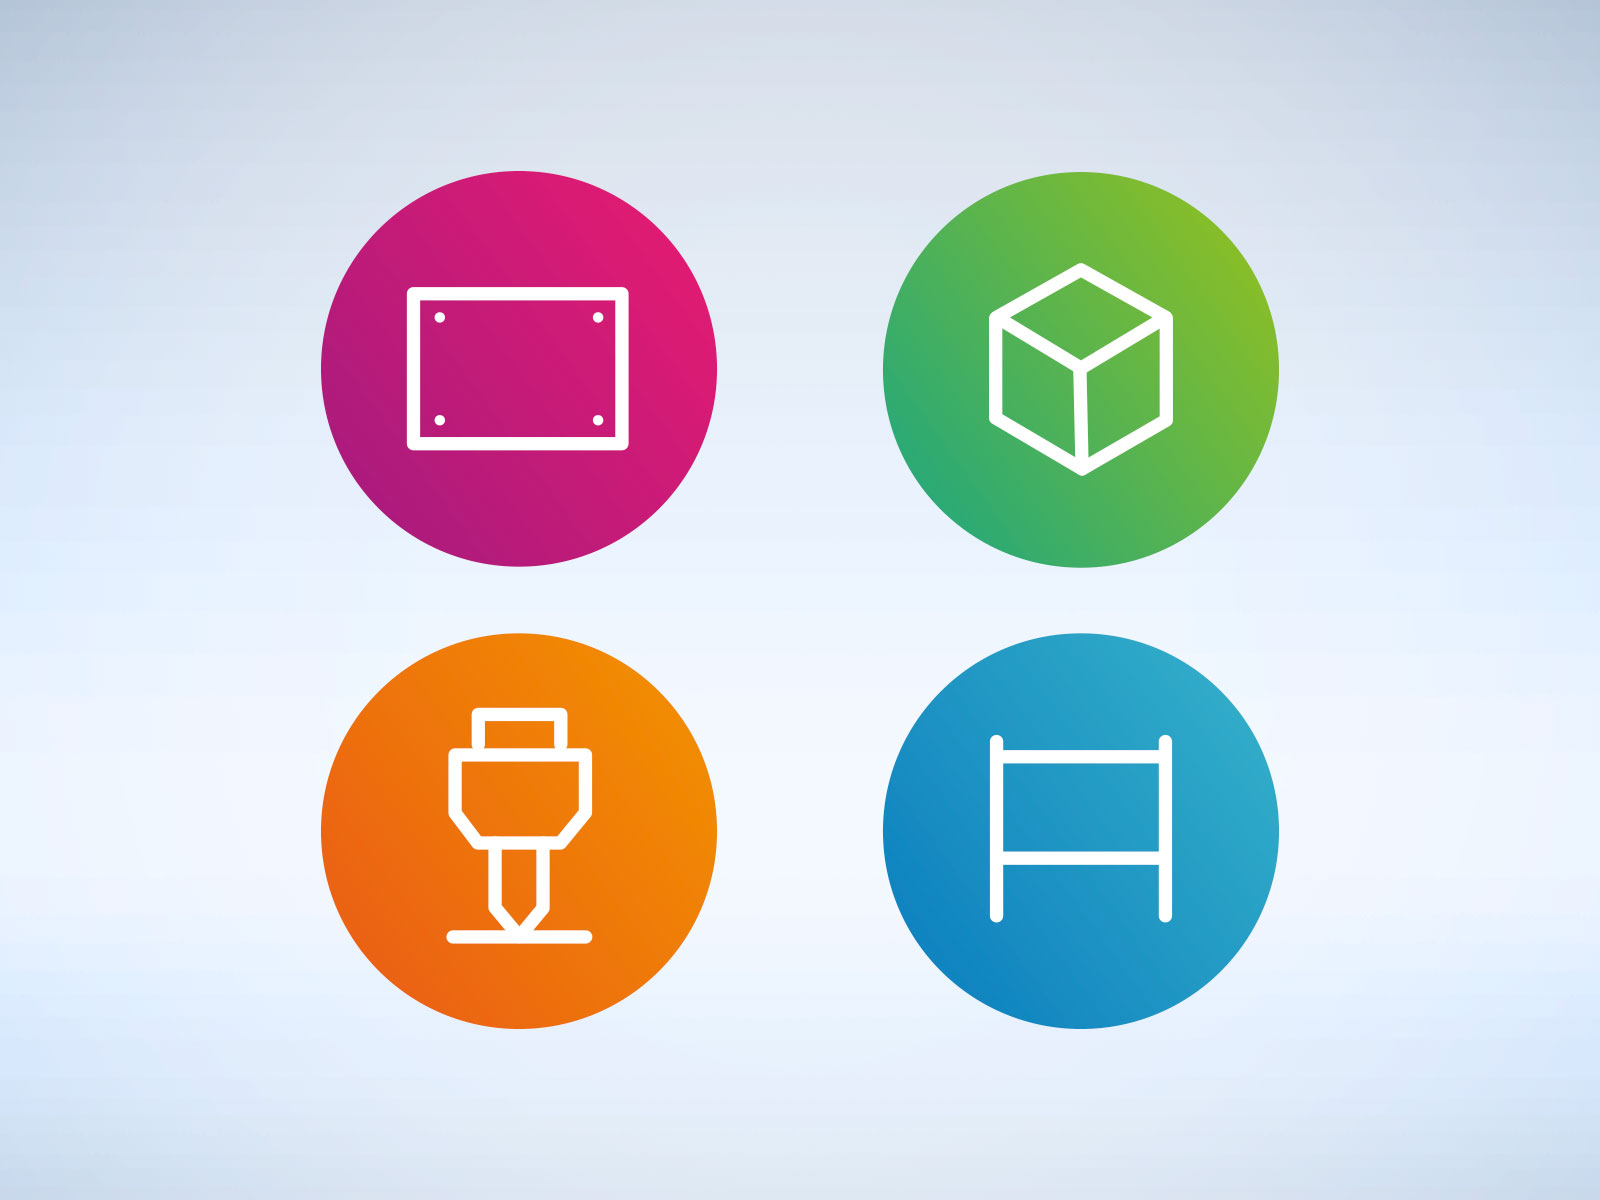 InDiSIGNS website icons